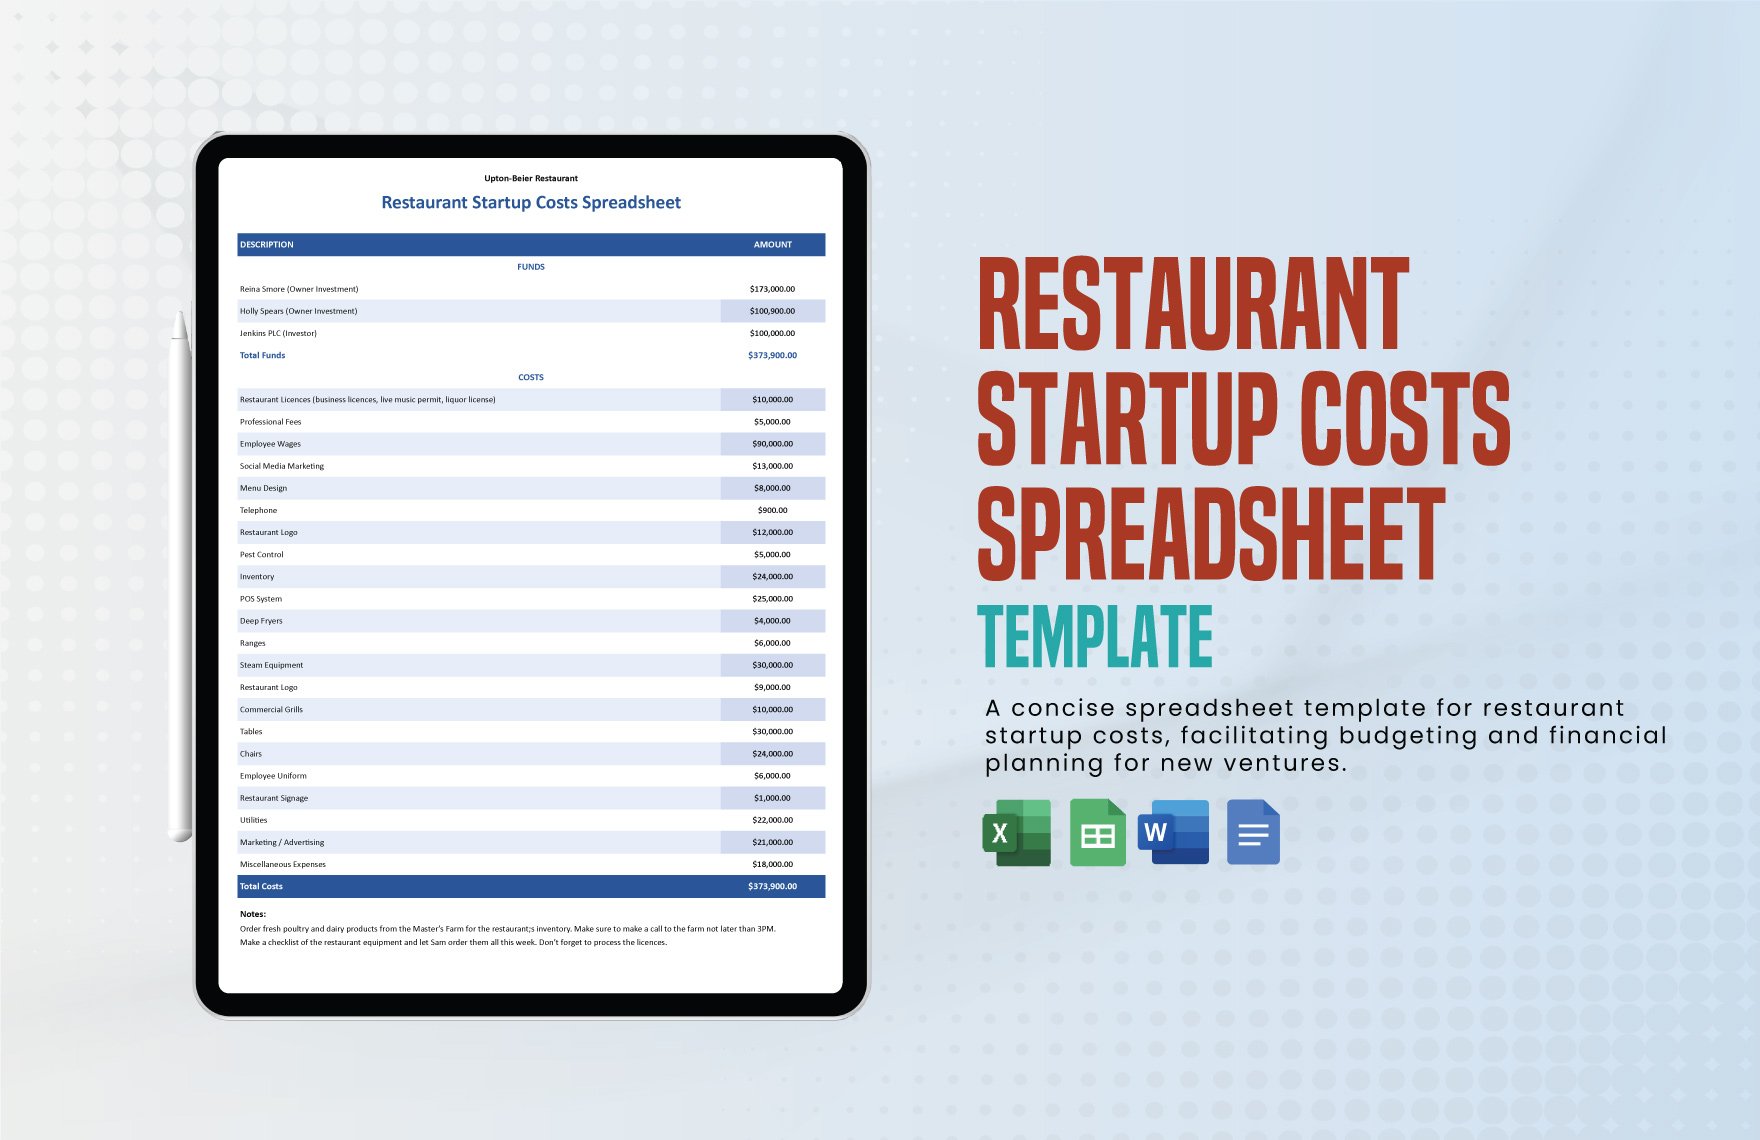 Restaurant Startup Costs Spreadsheet Template in Word, Google Docs, Excel, Google Sheets